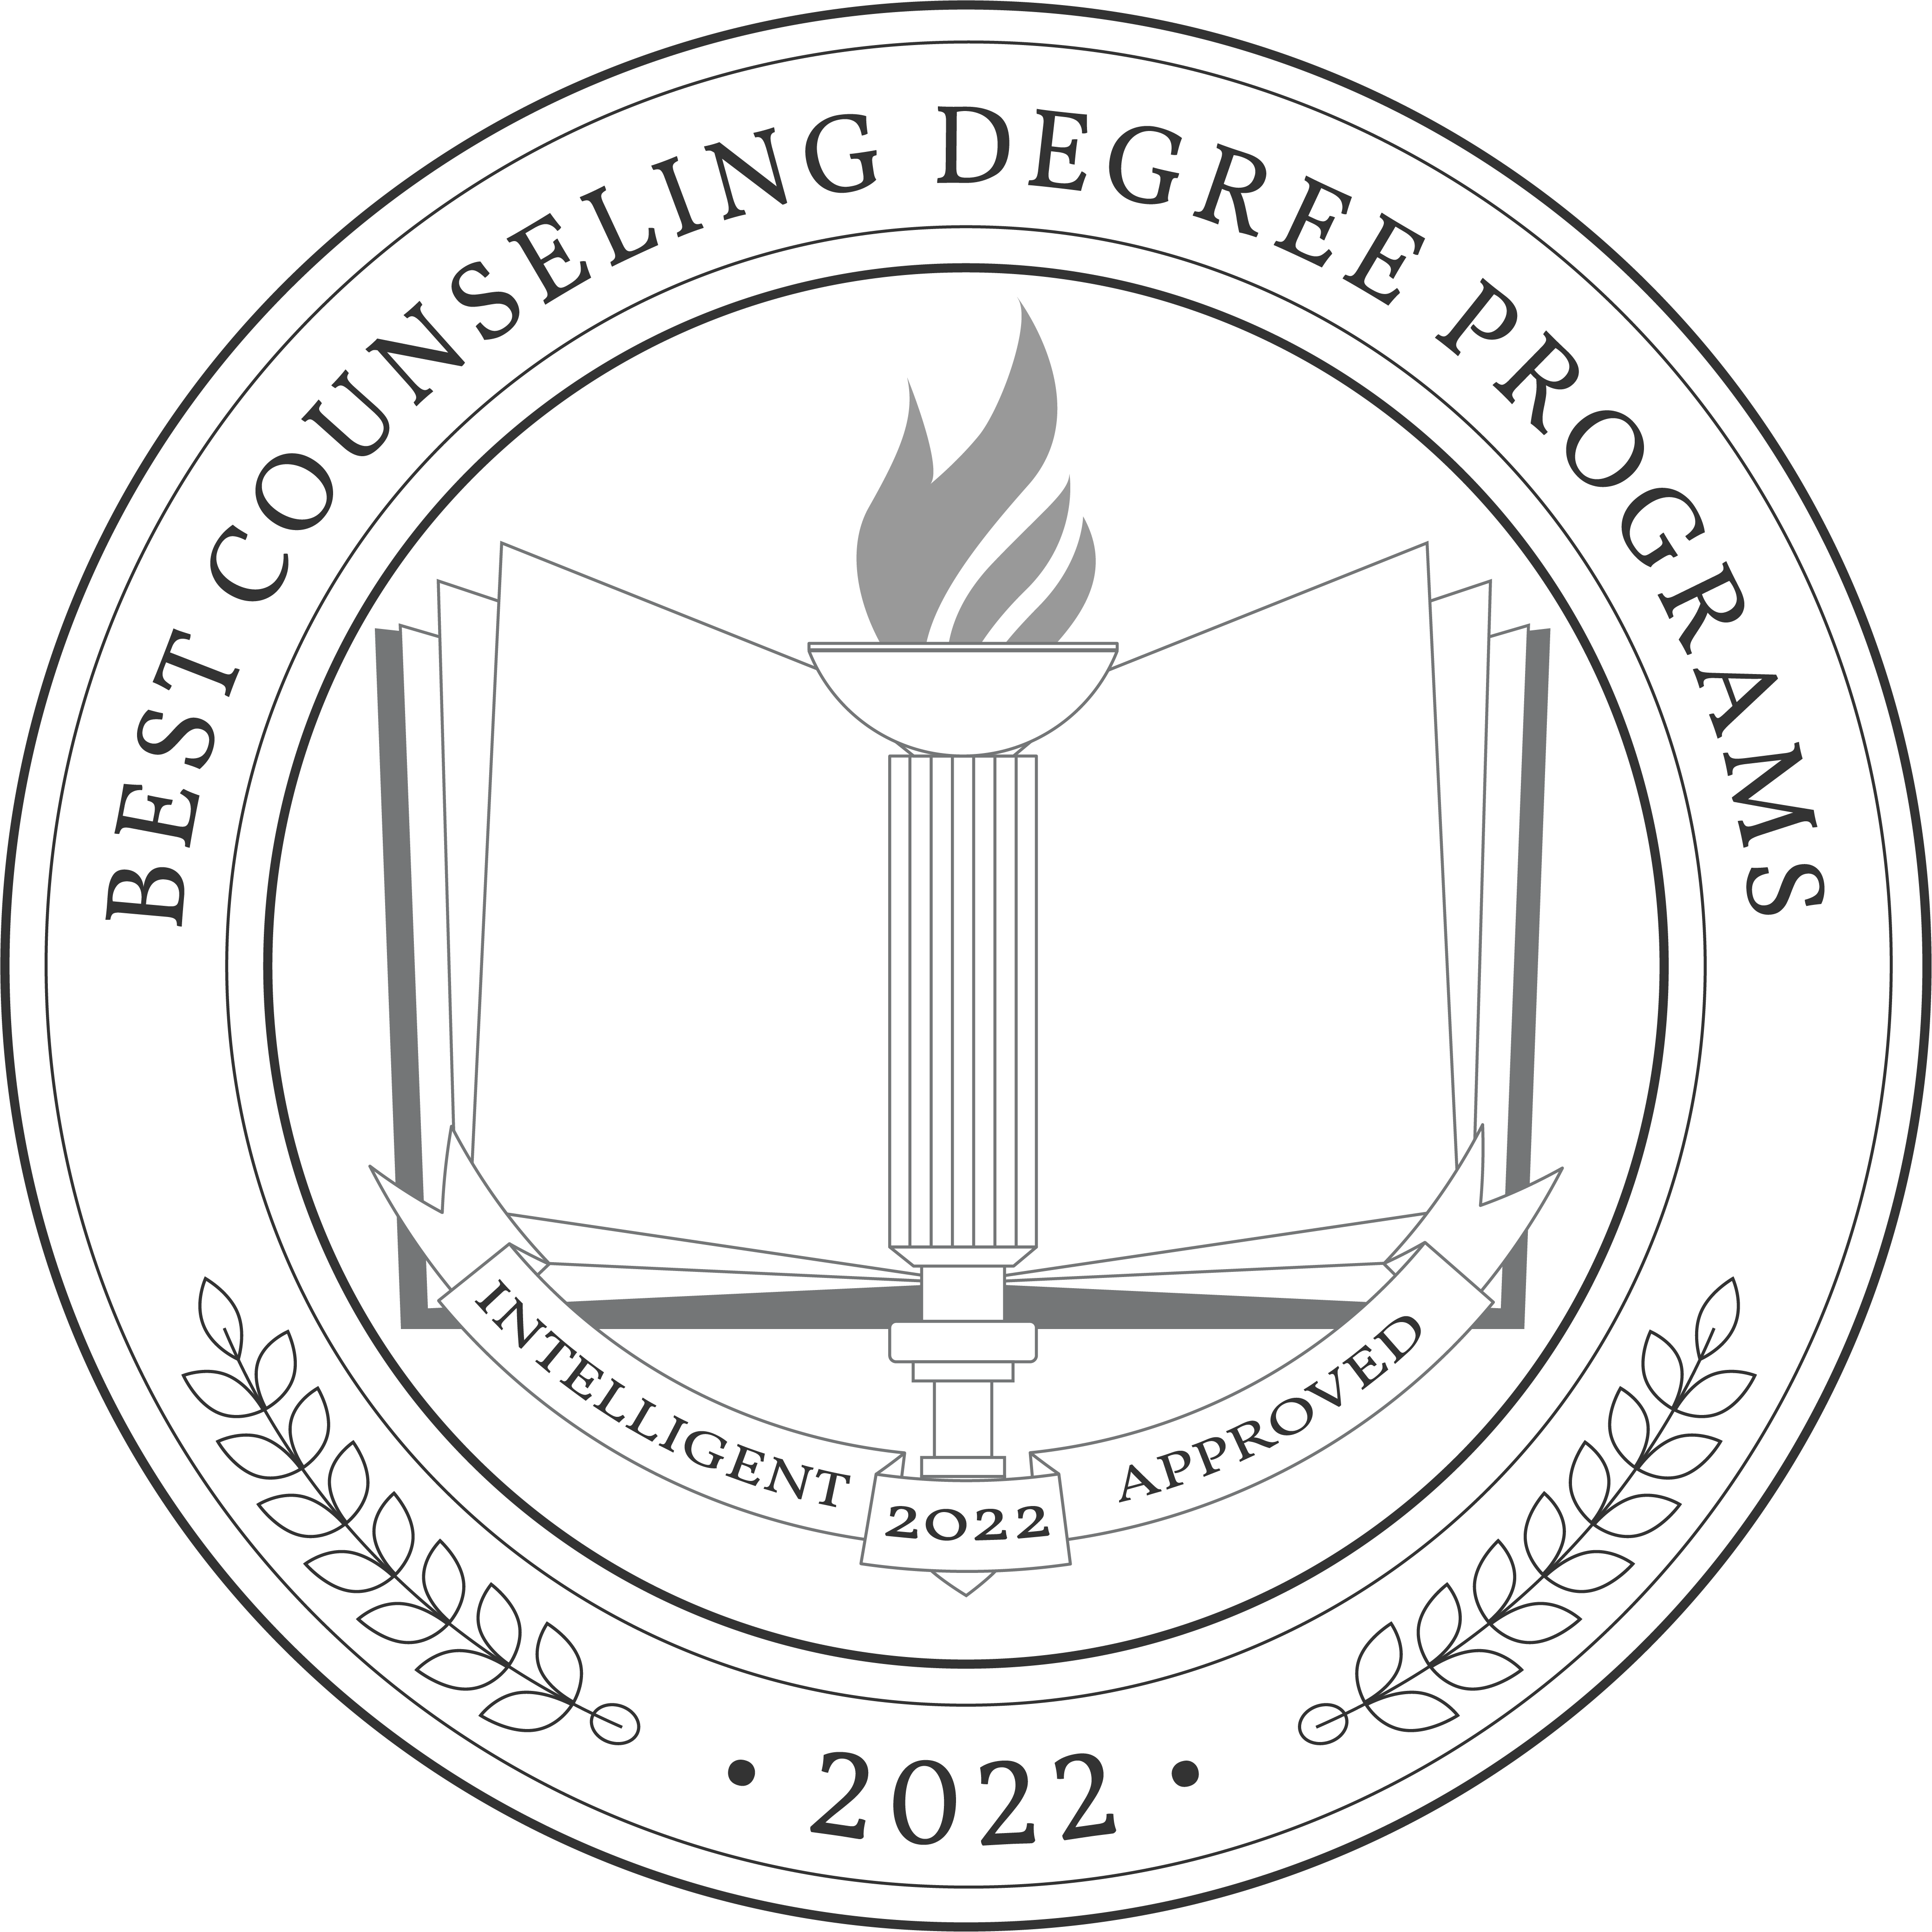 Best-Counseling-Degree-Programs-Badge.png